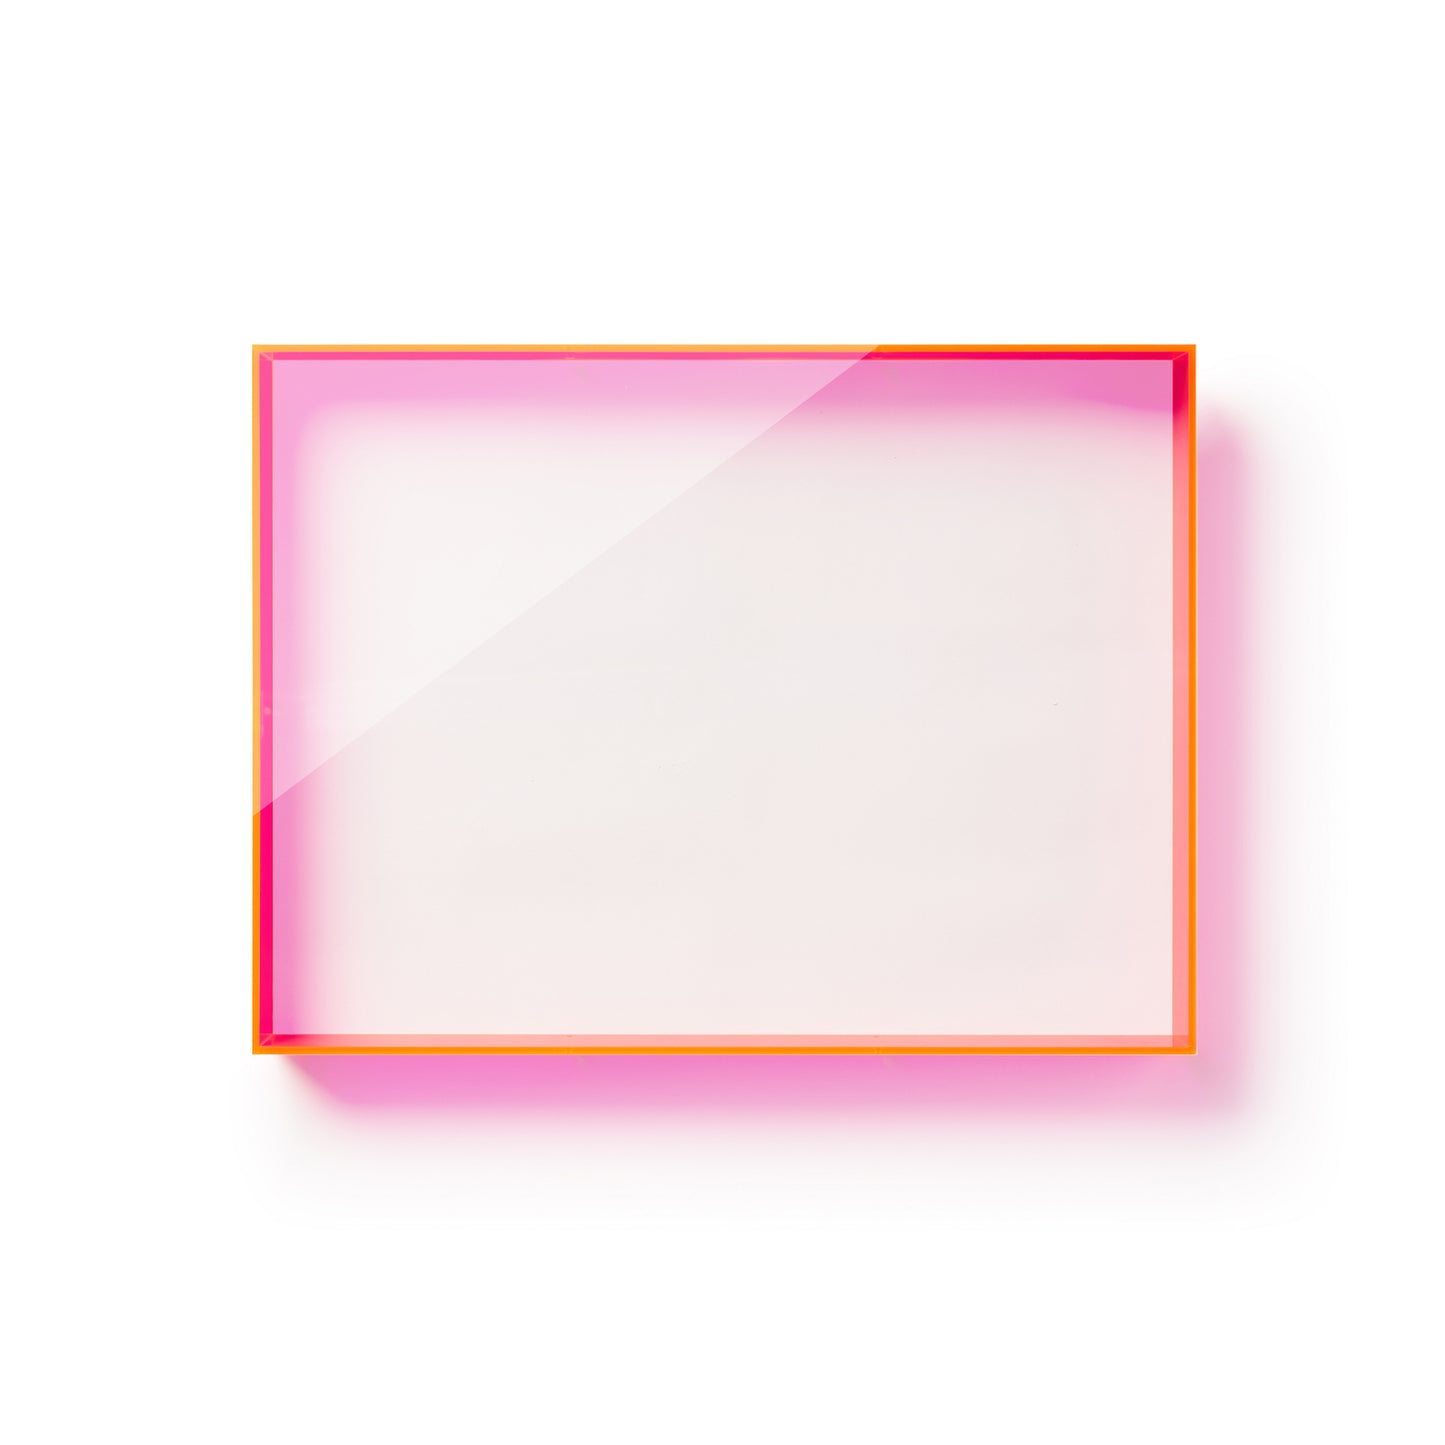 Shadowbox Lid CHOOSE Your Color 18x24x3" (Neon Pink, Orange, or Sea Glass)